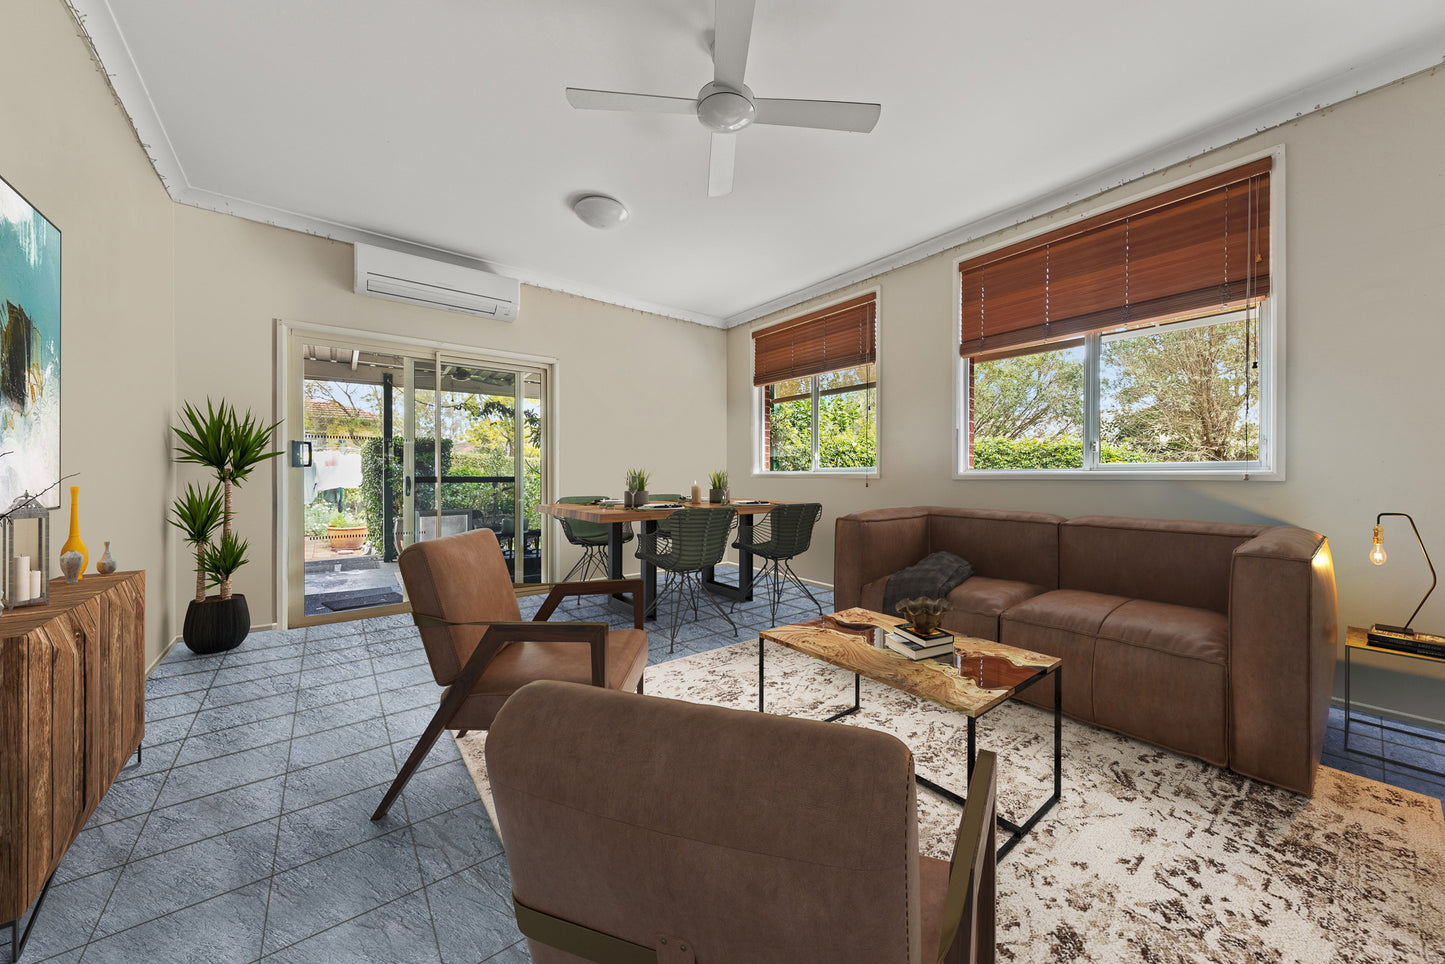 18 Kareela Road, Baulkham Hills NSW 2153 - Another sale completed by the Team @ $1,700,000.00!